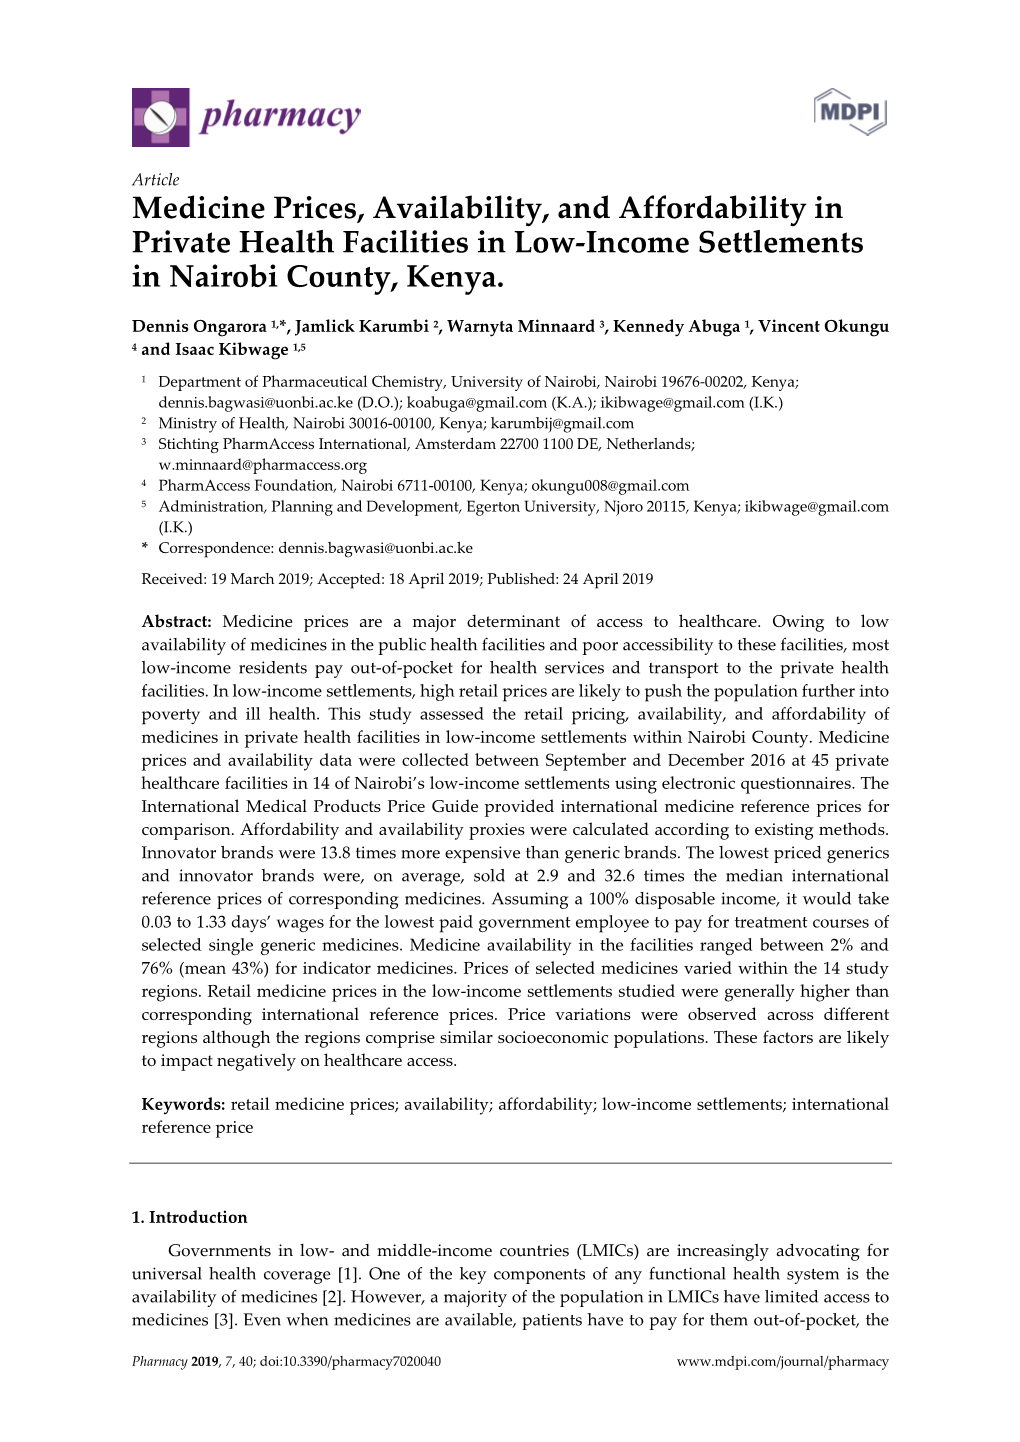 Medicine Prices, Availability, and Affordability in Private Health Facilities in Low-Income Settlements in Nairobi County, Kenya